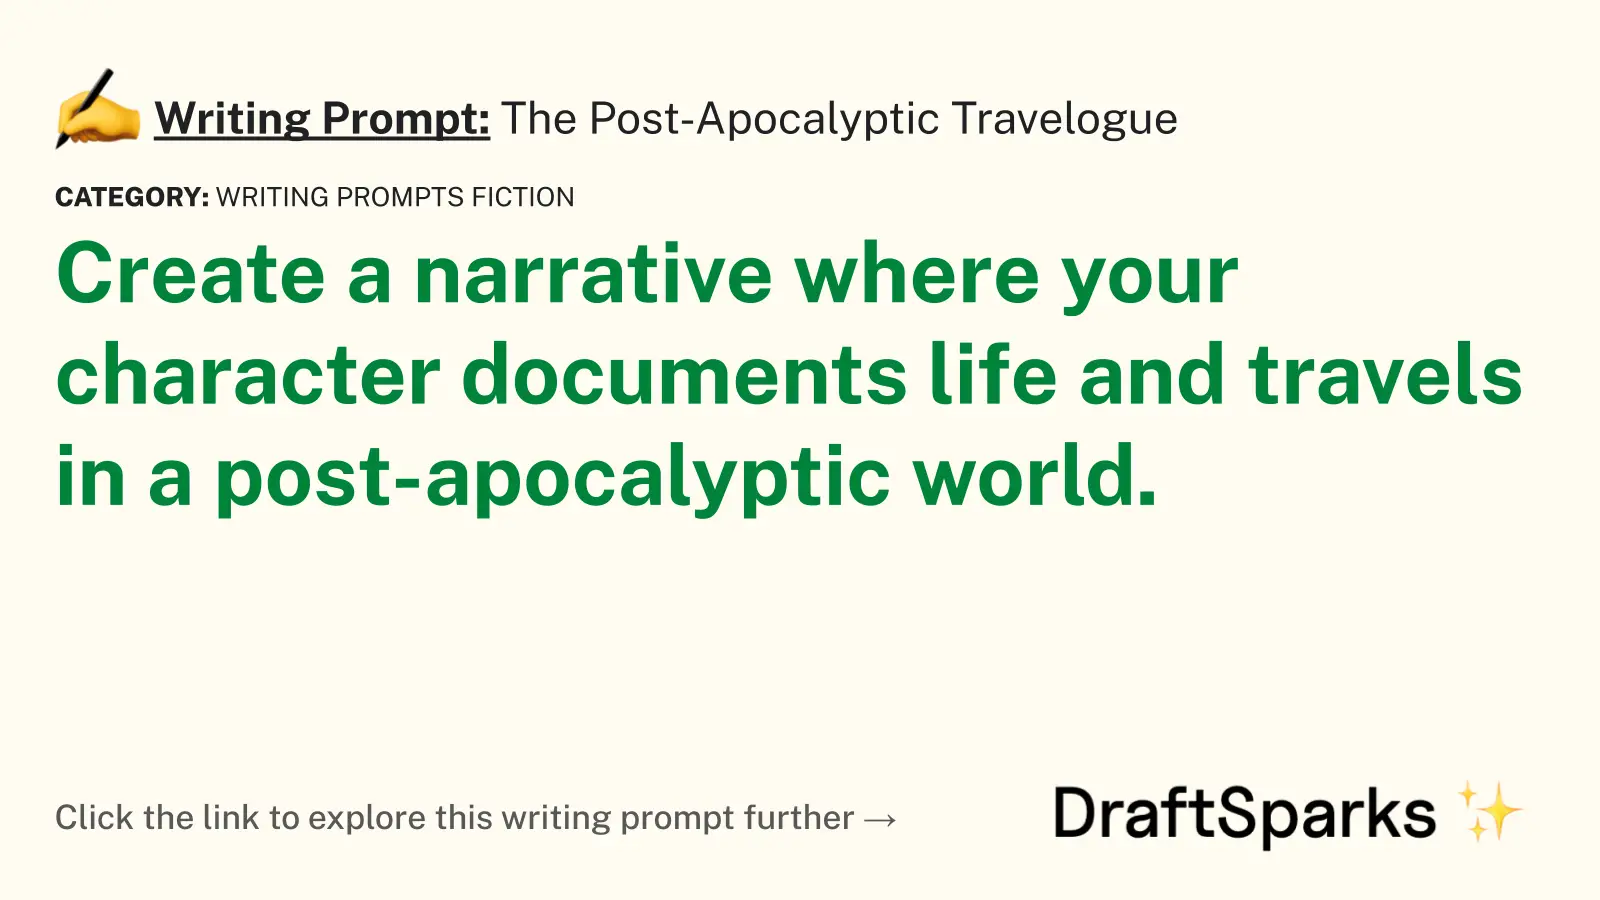 The Post-Apocalyptic Travelogue